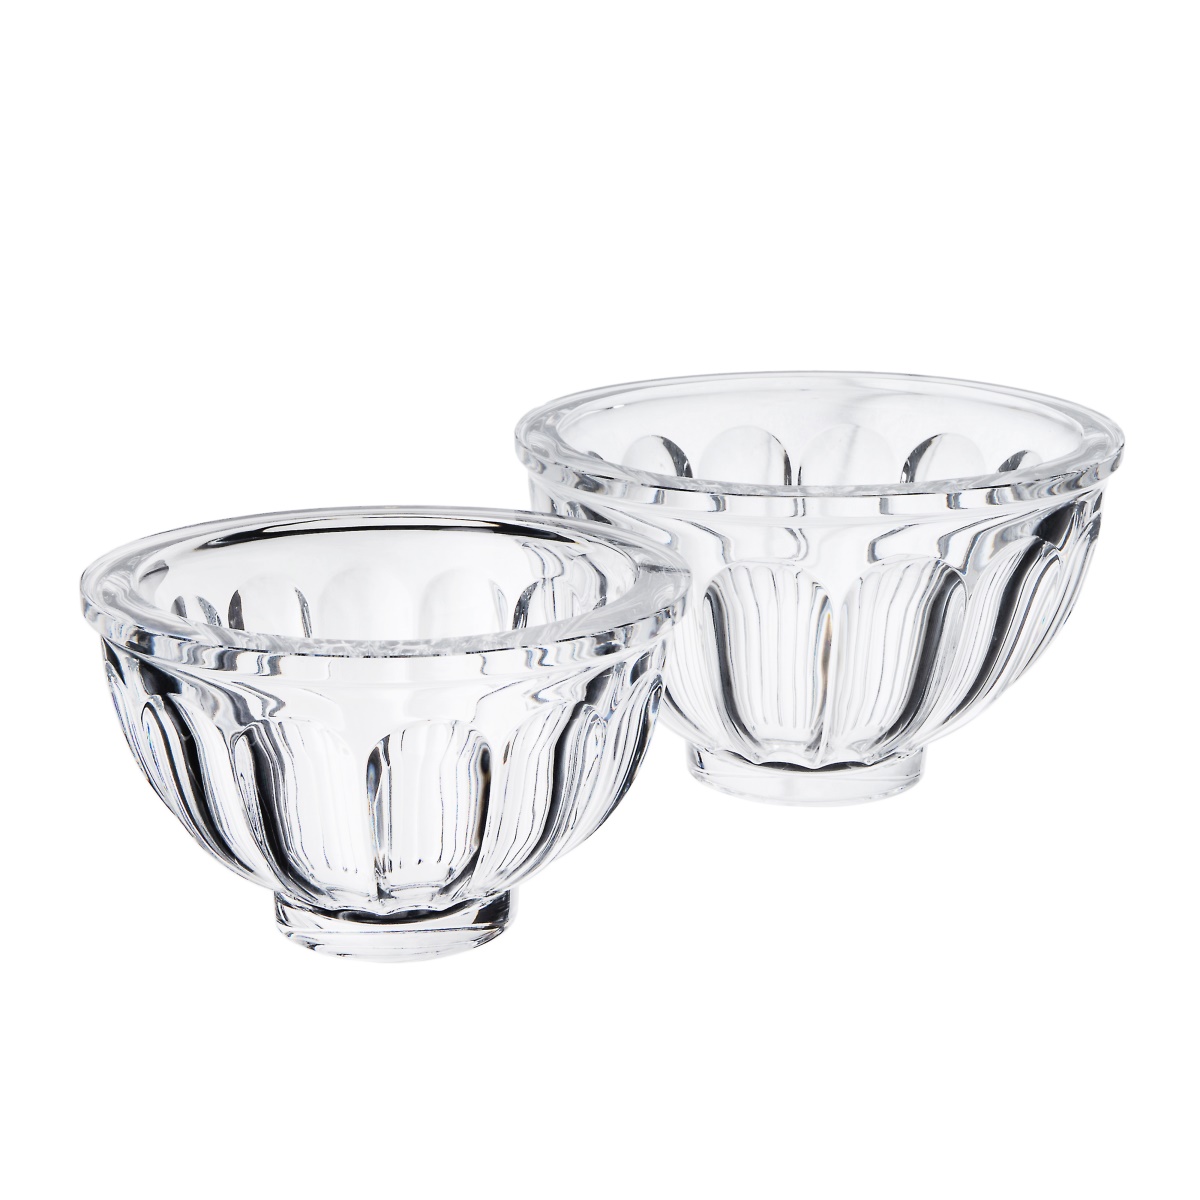 PAIR OF THICK GLASS BOWLS